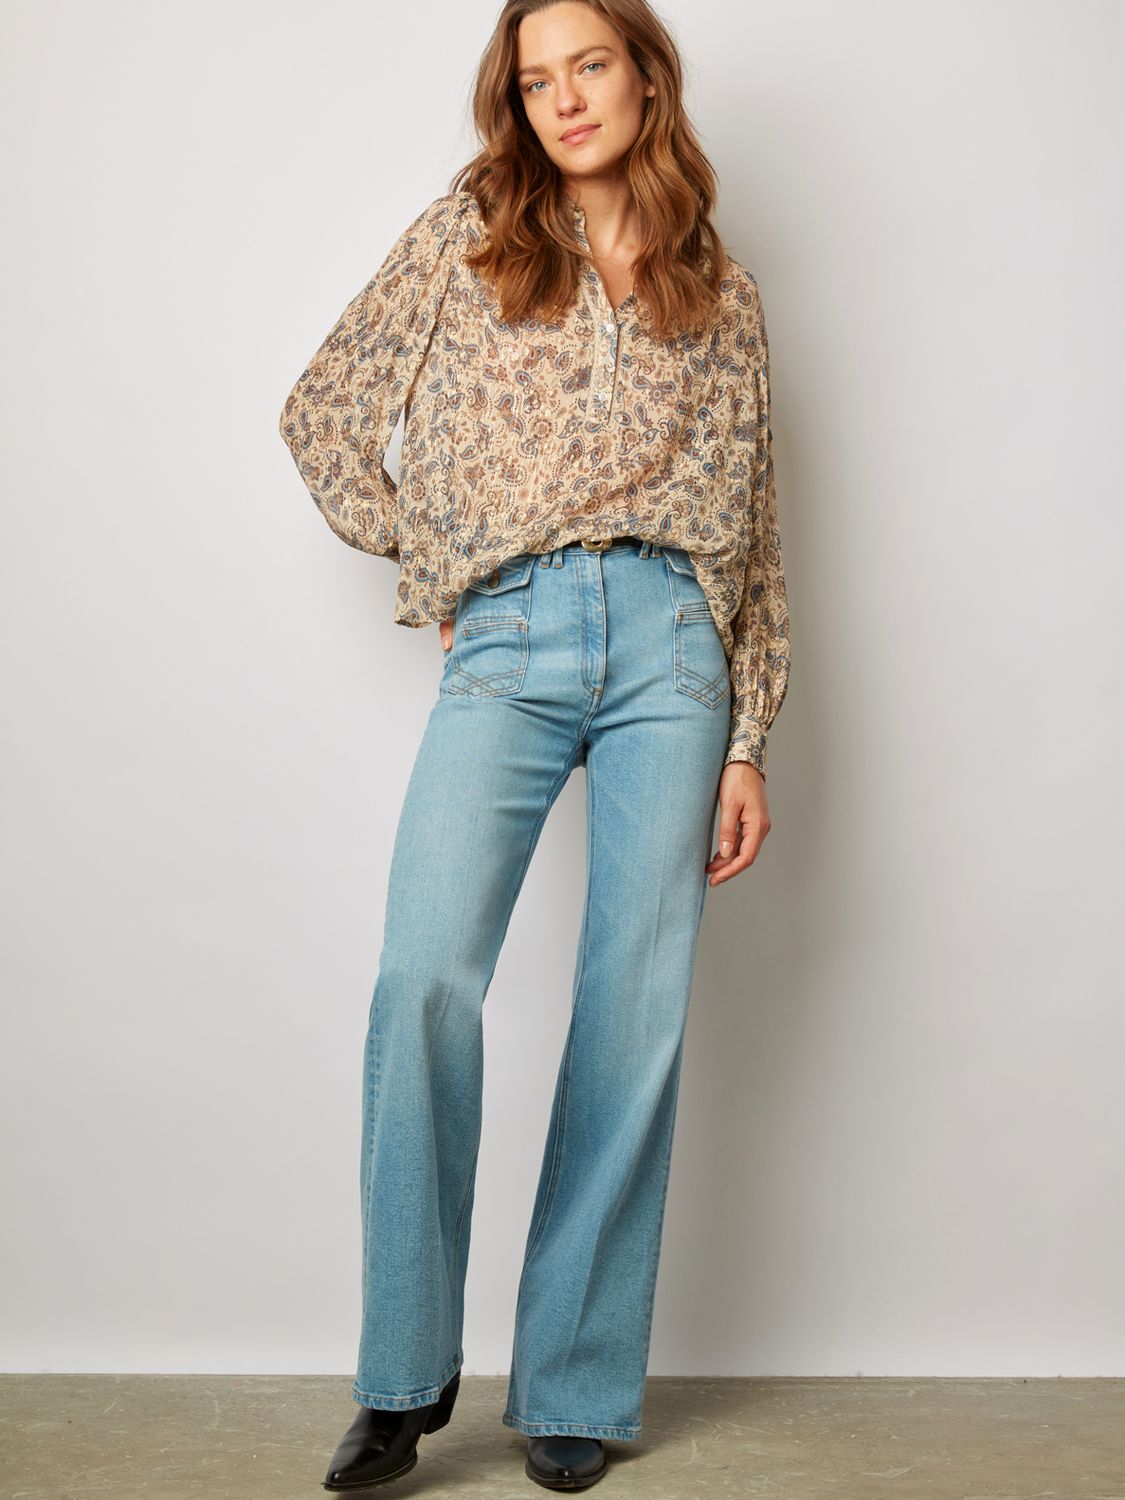 Adult 60's Paisley Top and Black Bell Bottom Pants - Candy Apple